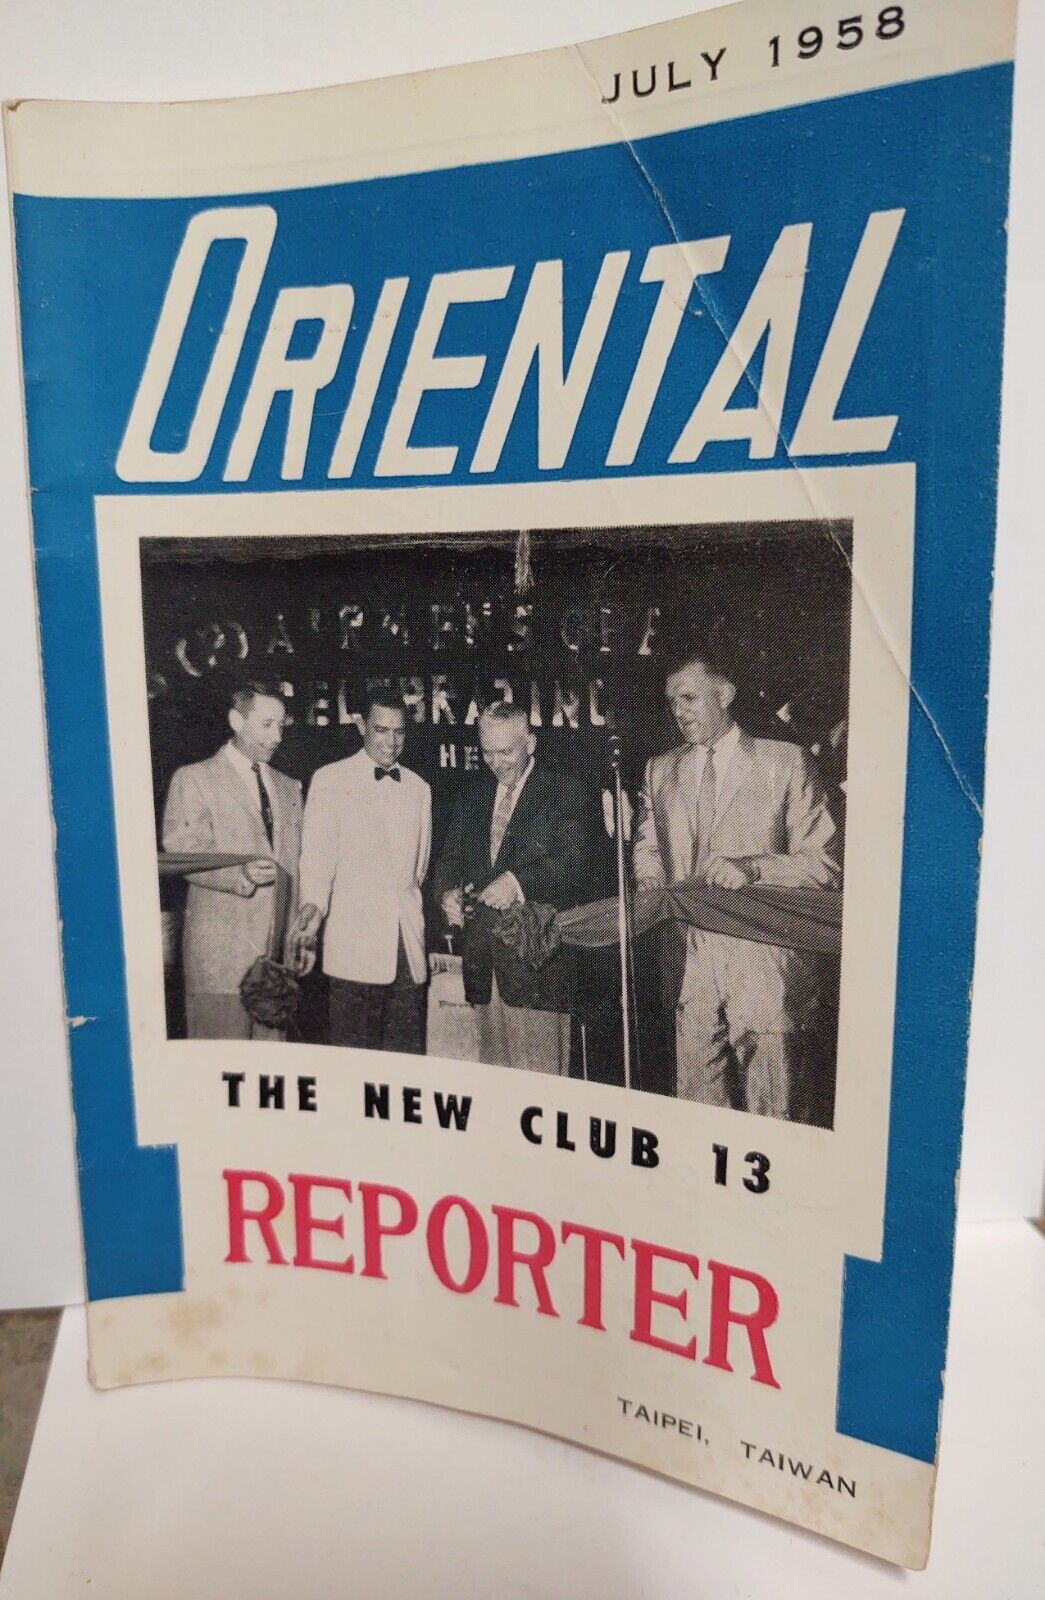 1958 Vintage ORIENTAL The New Club 13 Reporter Taipel Taiwan Air Task Force 13